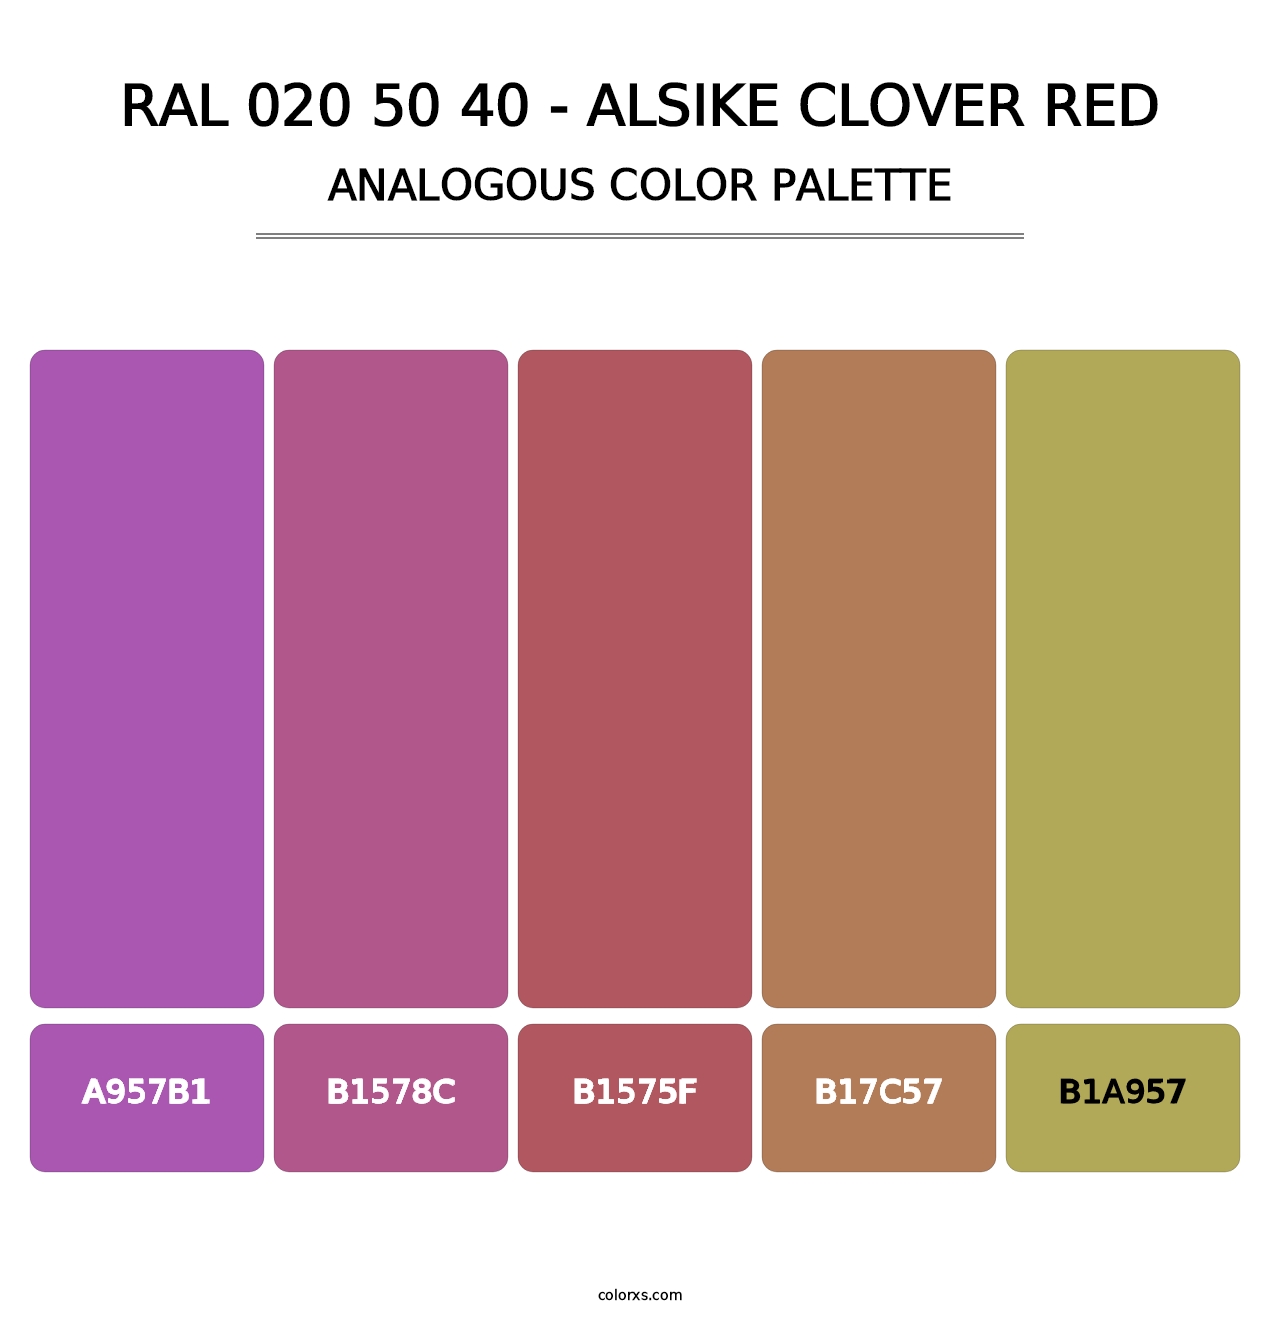 RAL 020 50 40 - Alsike Clover Red - Analogous Color Palette